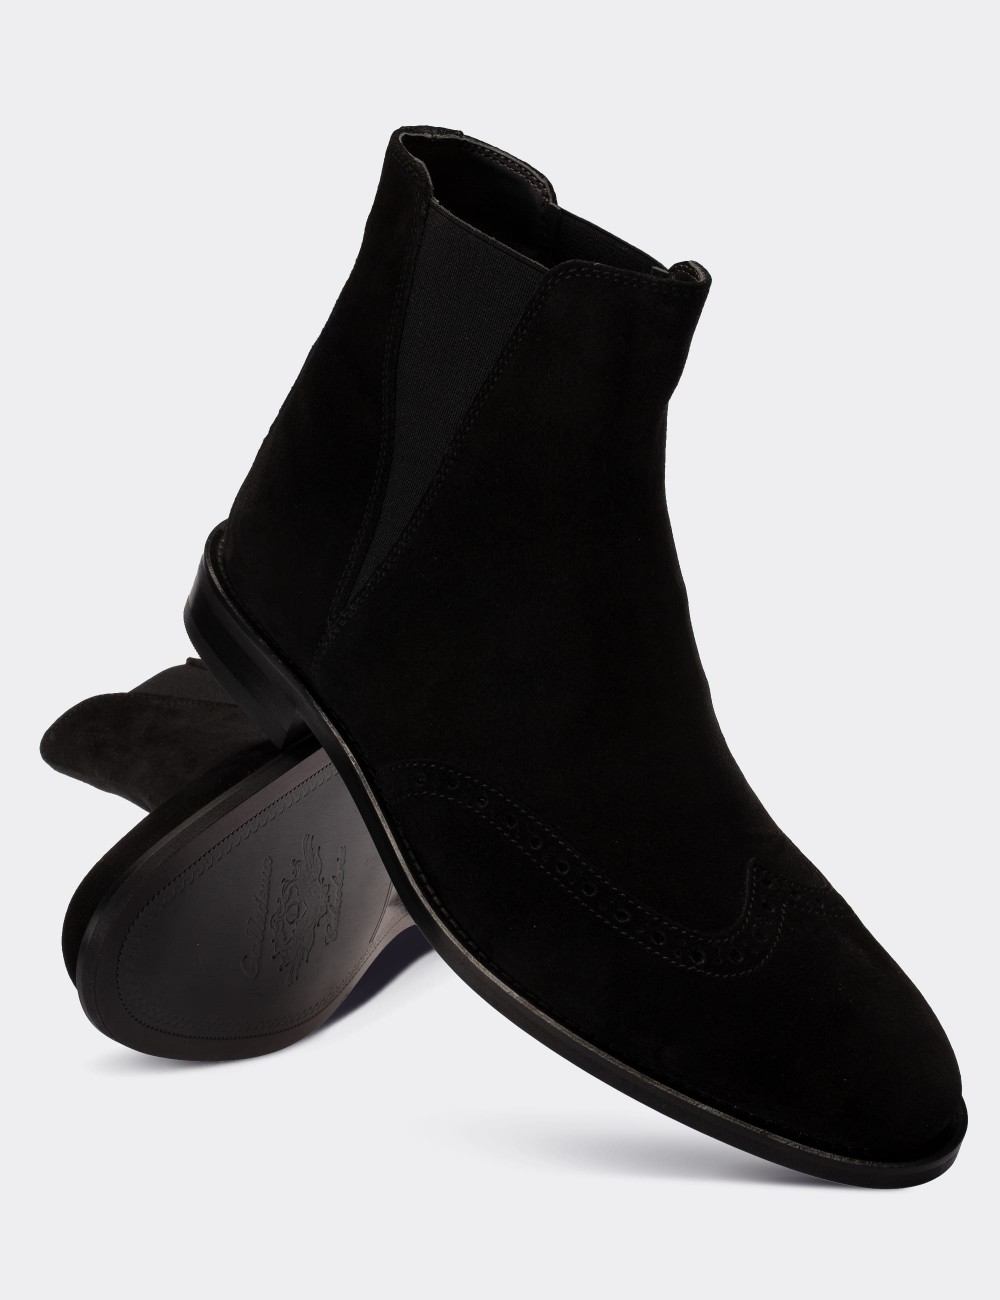 Black Suede Leather Chelsea Boots - 01816MSYHM01